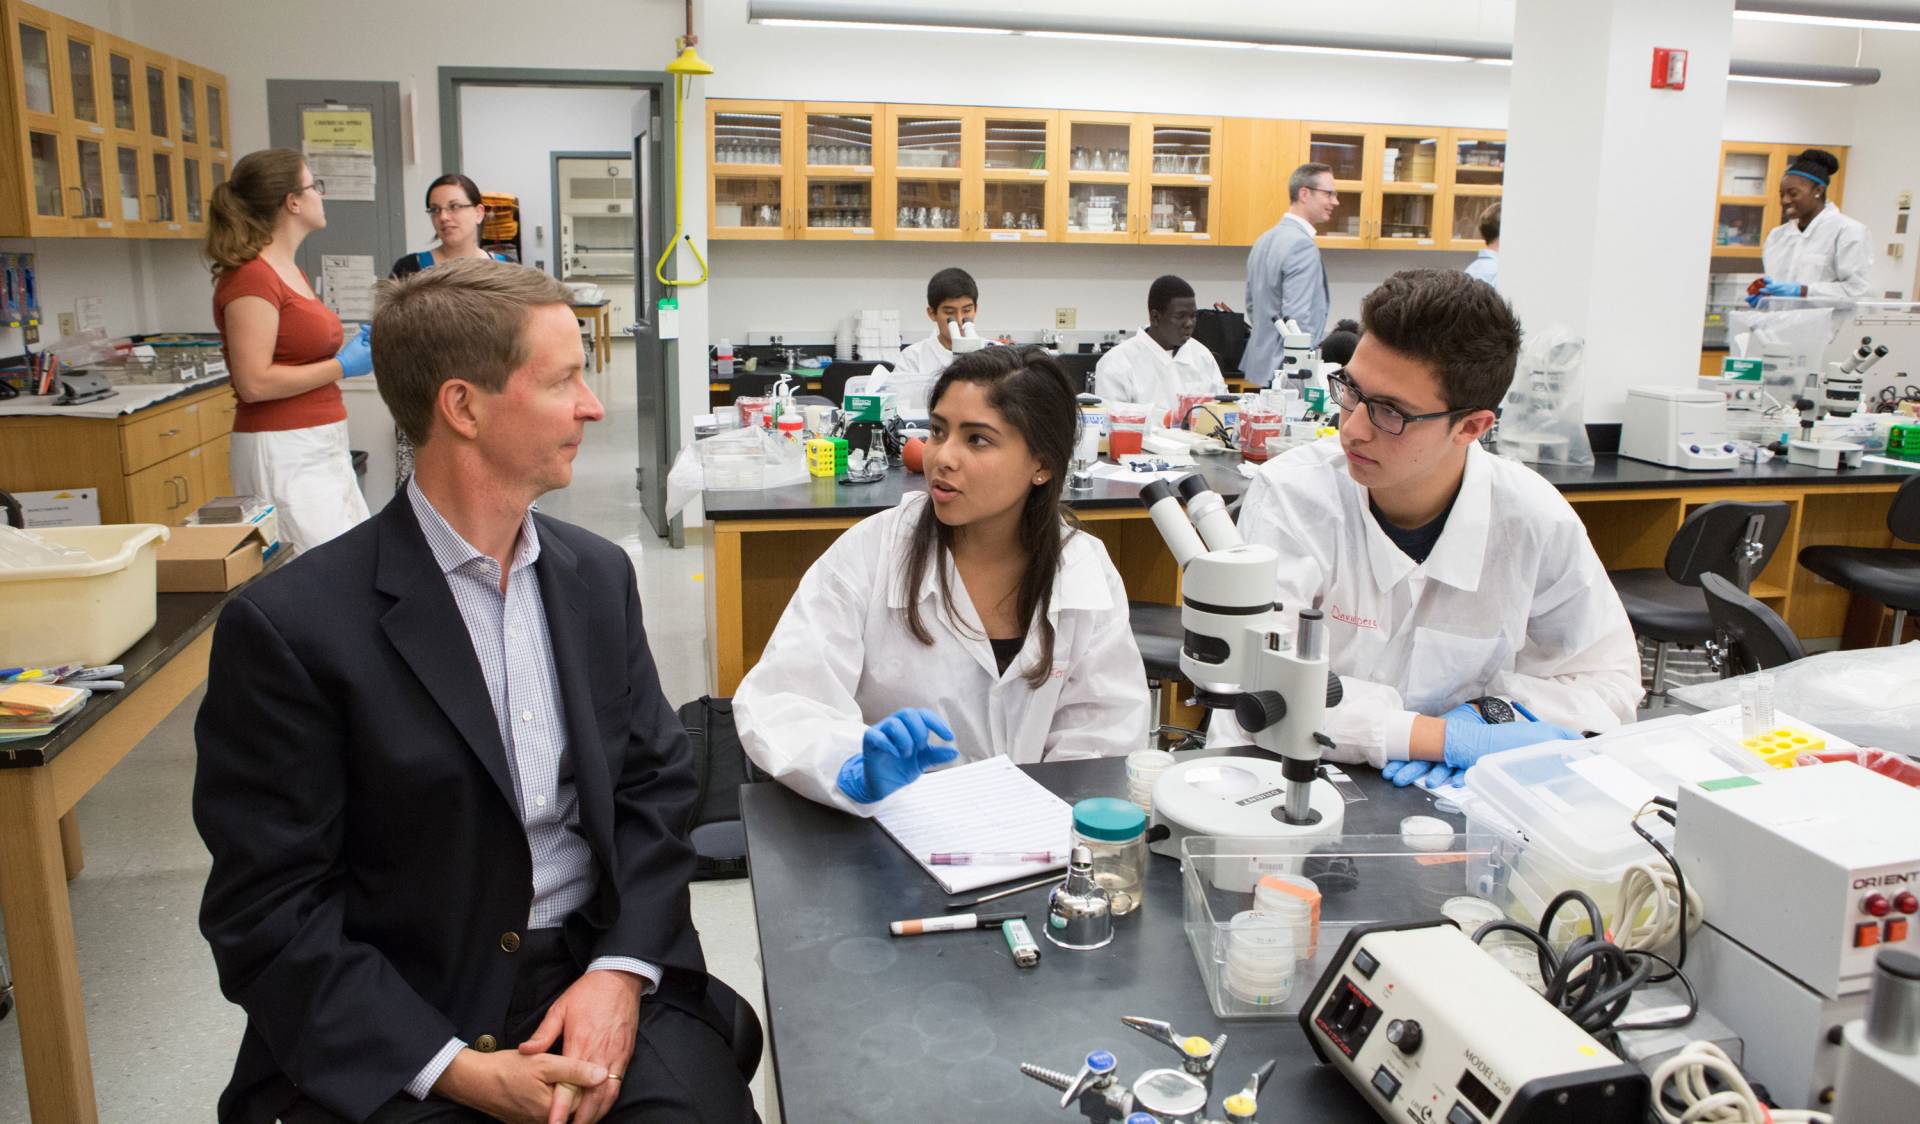 Bob Peck speaks to students while in a laboratory